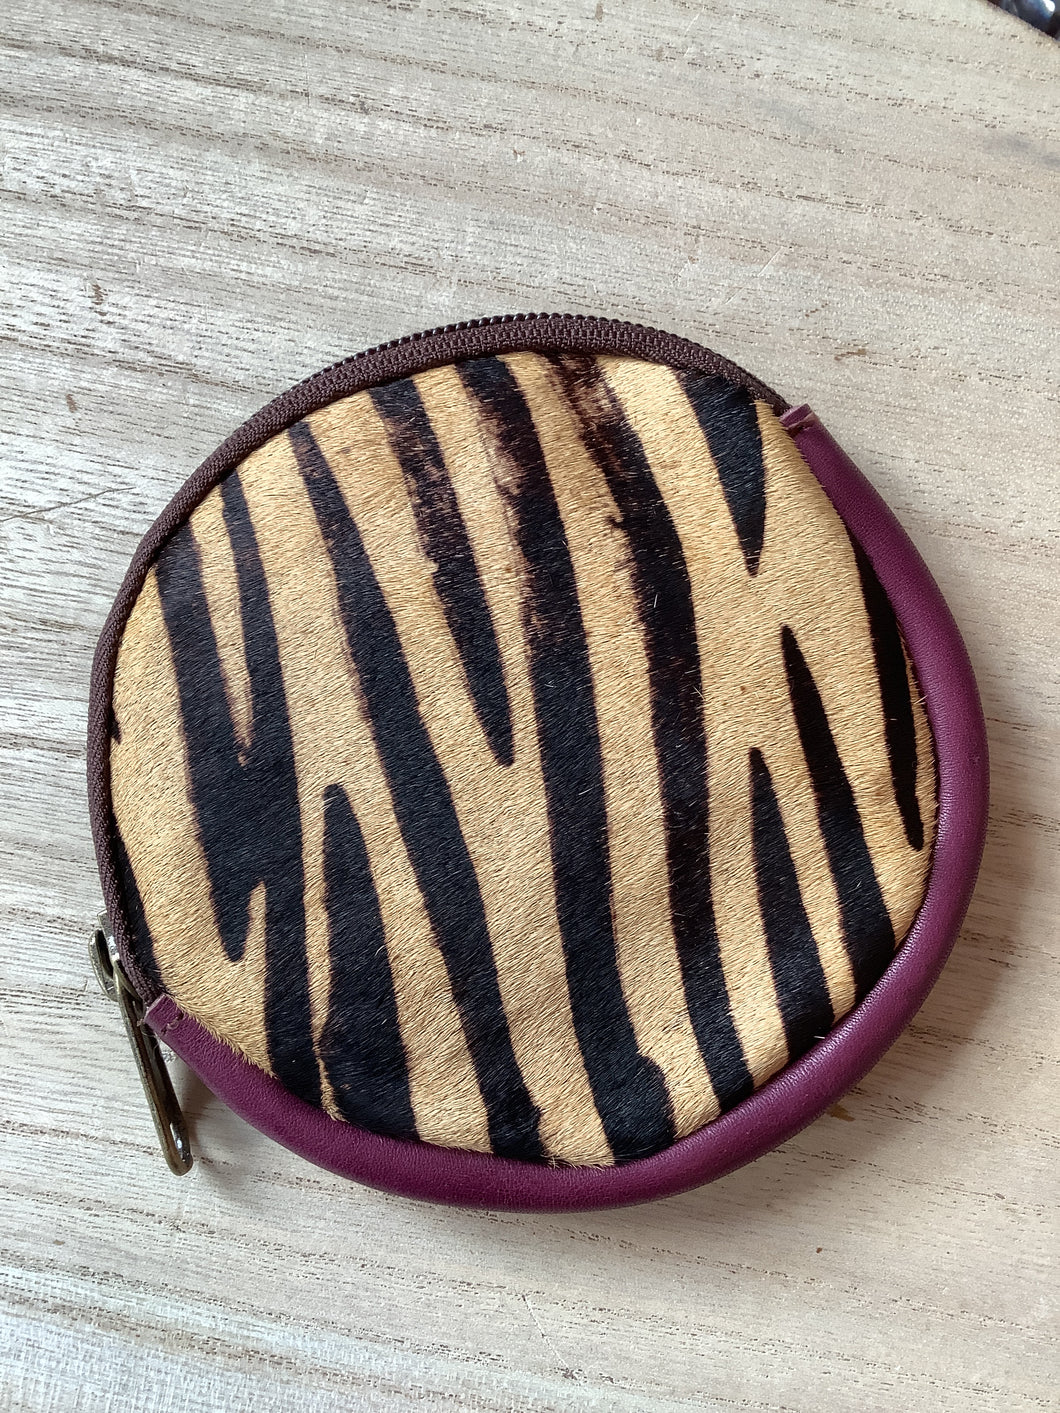 Round Fur & Leather Coin Purse